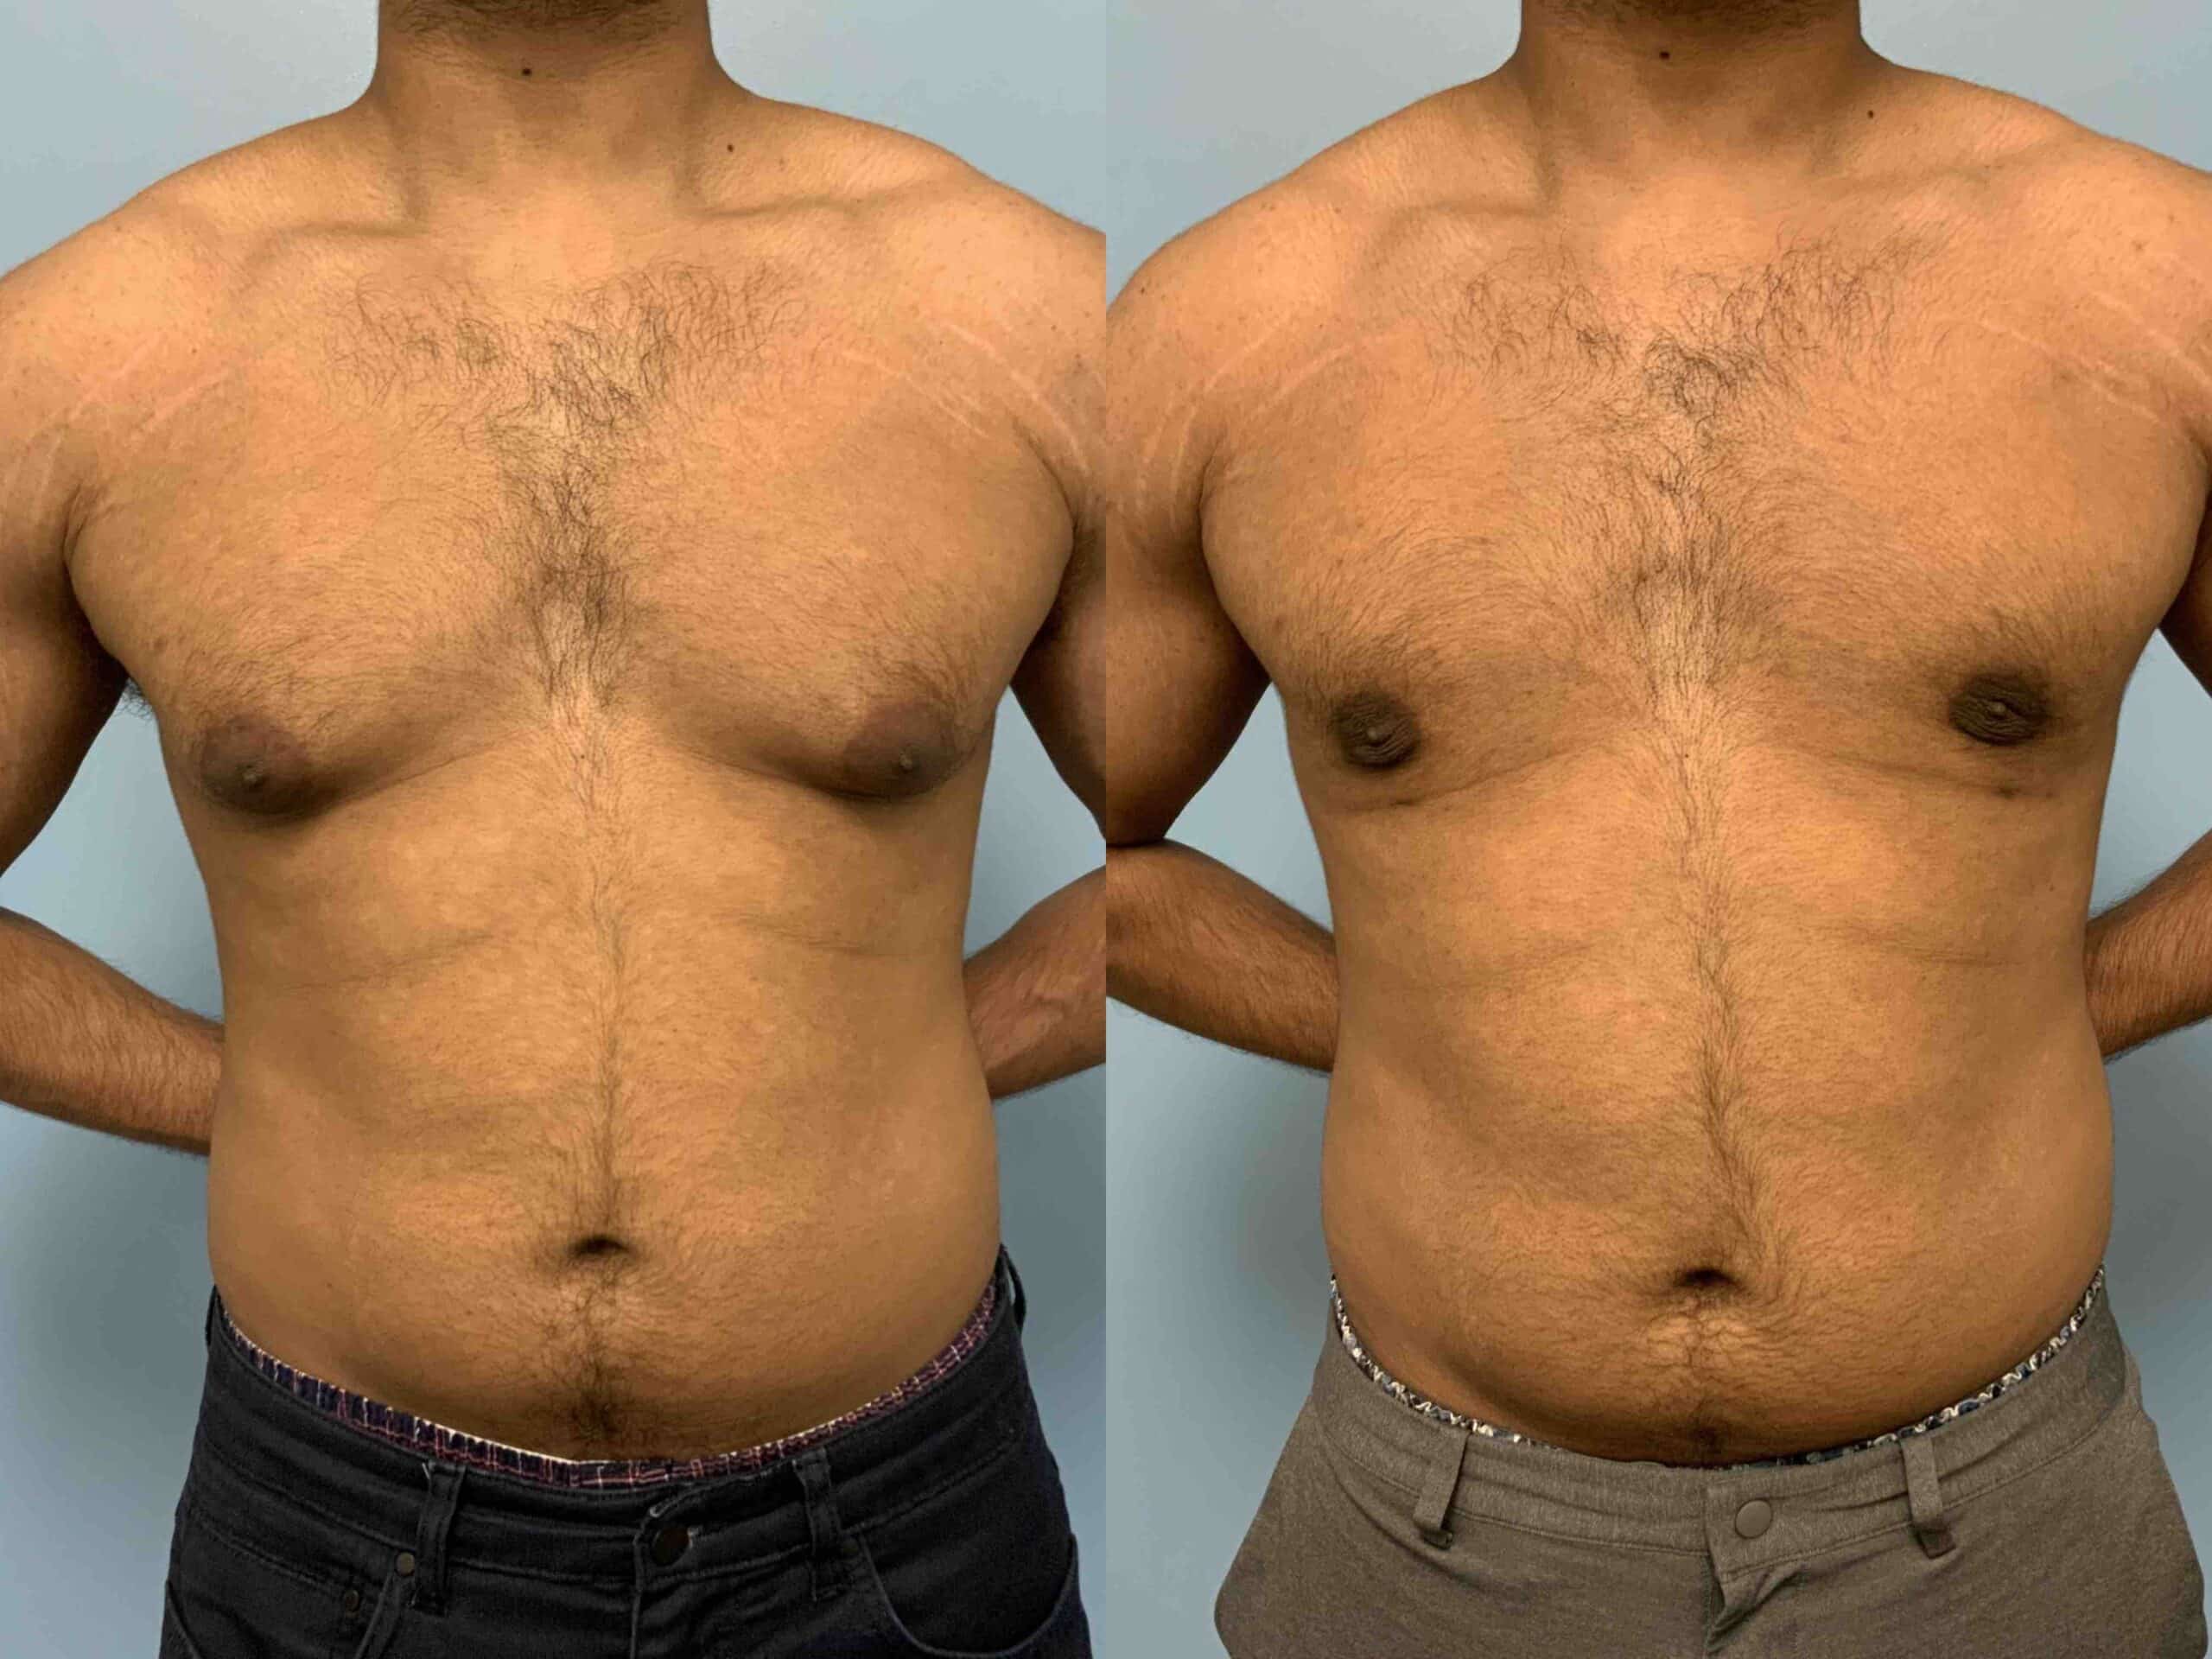 Before and after, patient 3 mo post op from Renuvion Chest, VASER Chest, Gynecomastia procedure performed by Dr. Paul Vanek